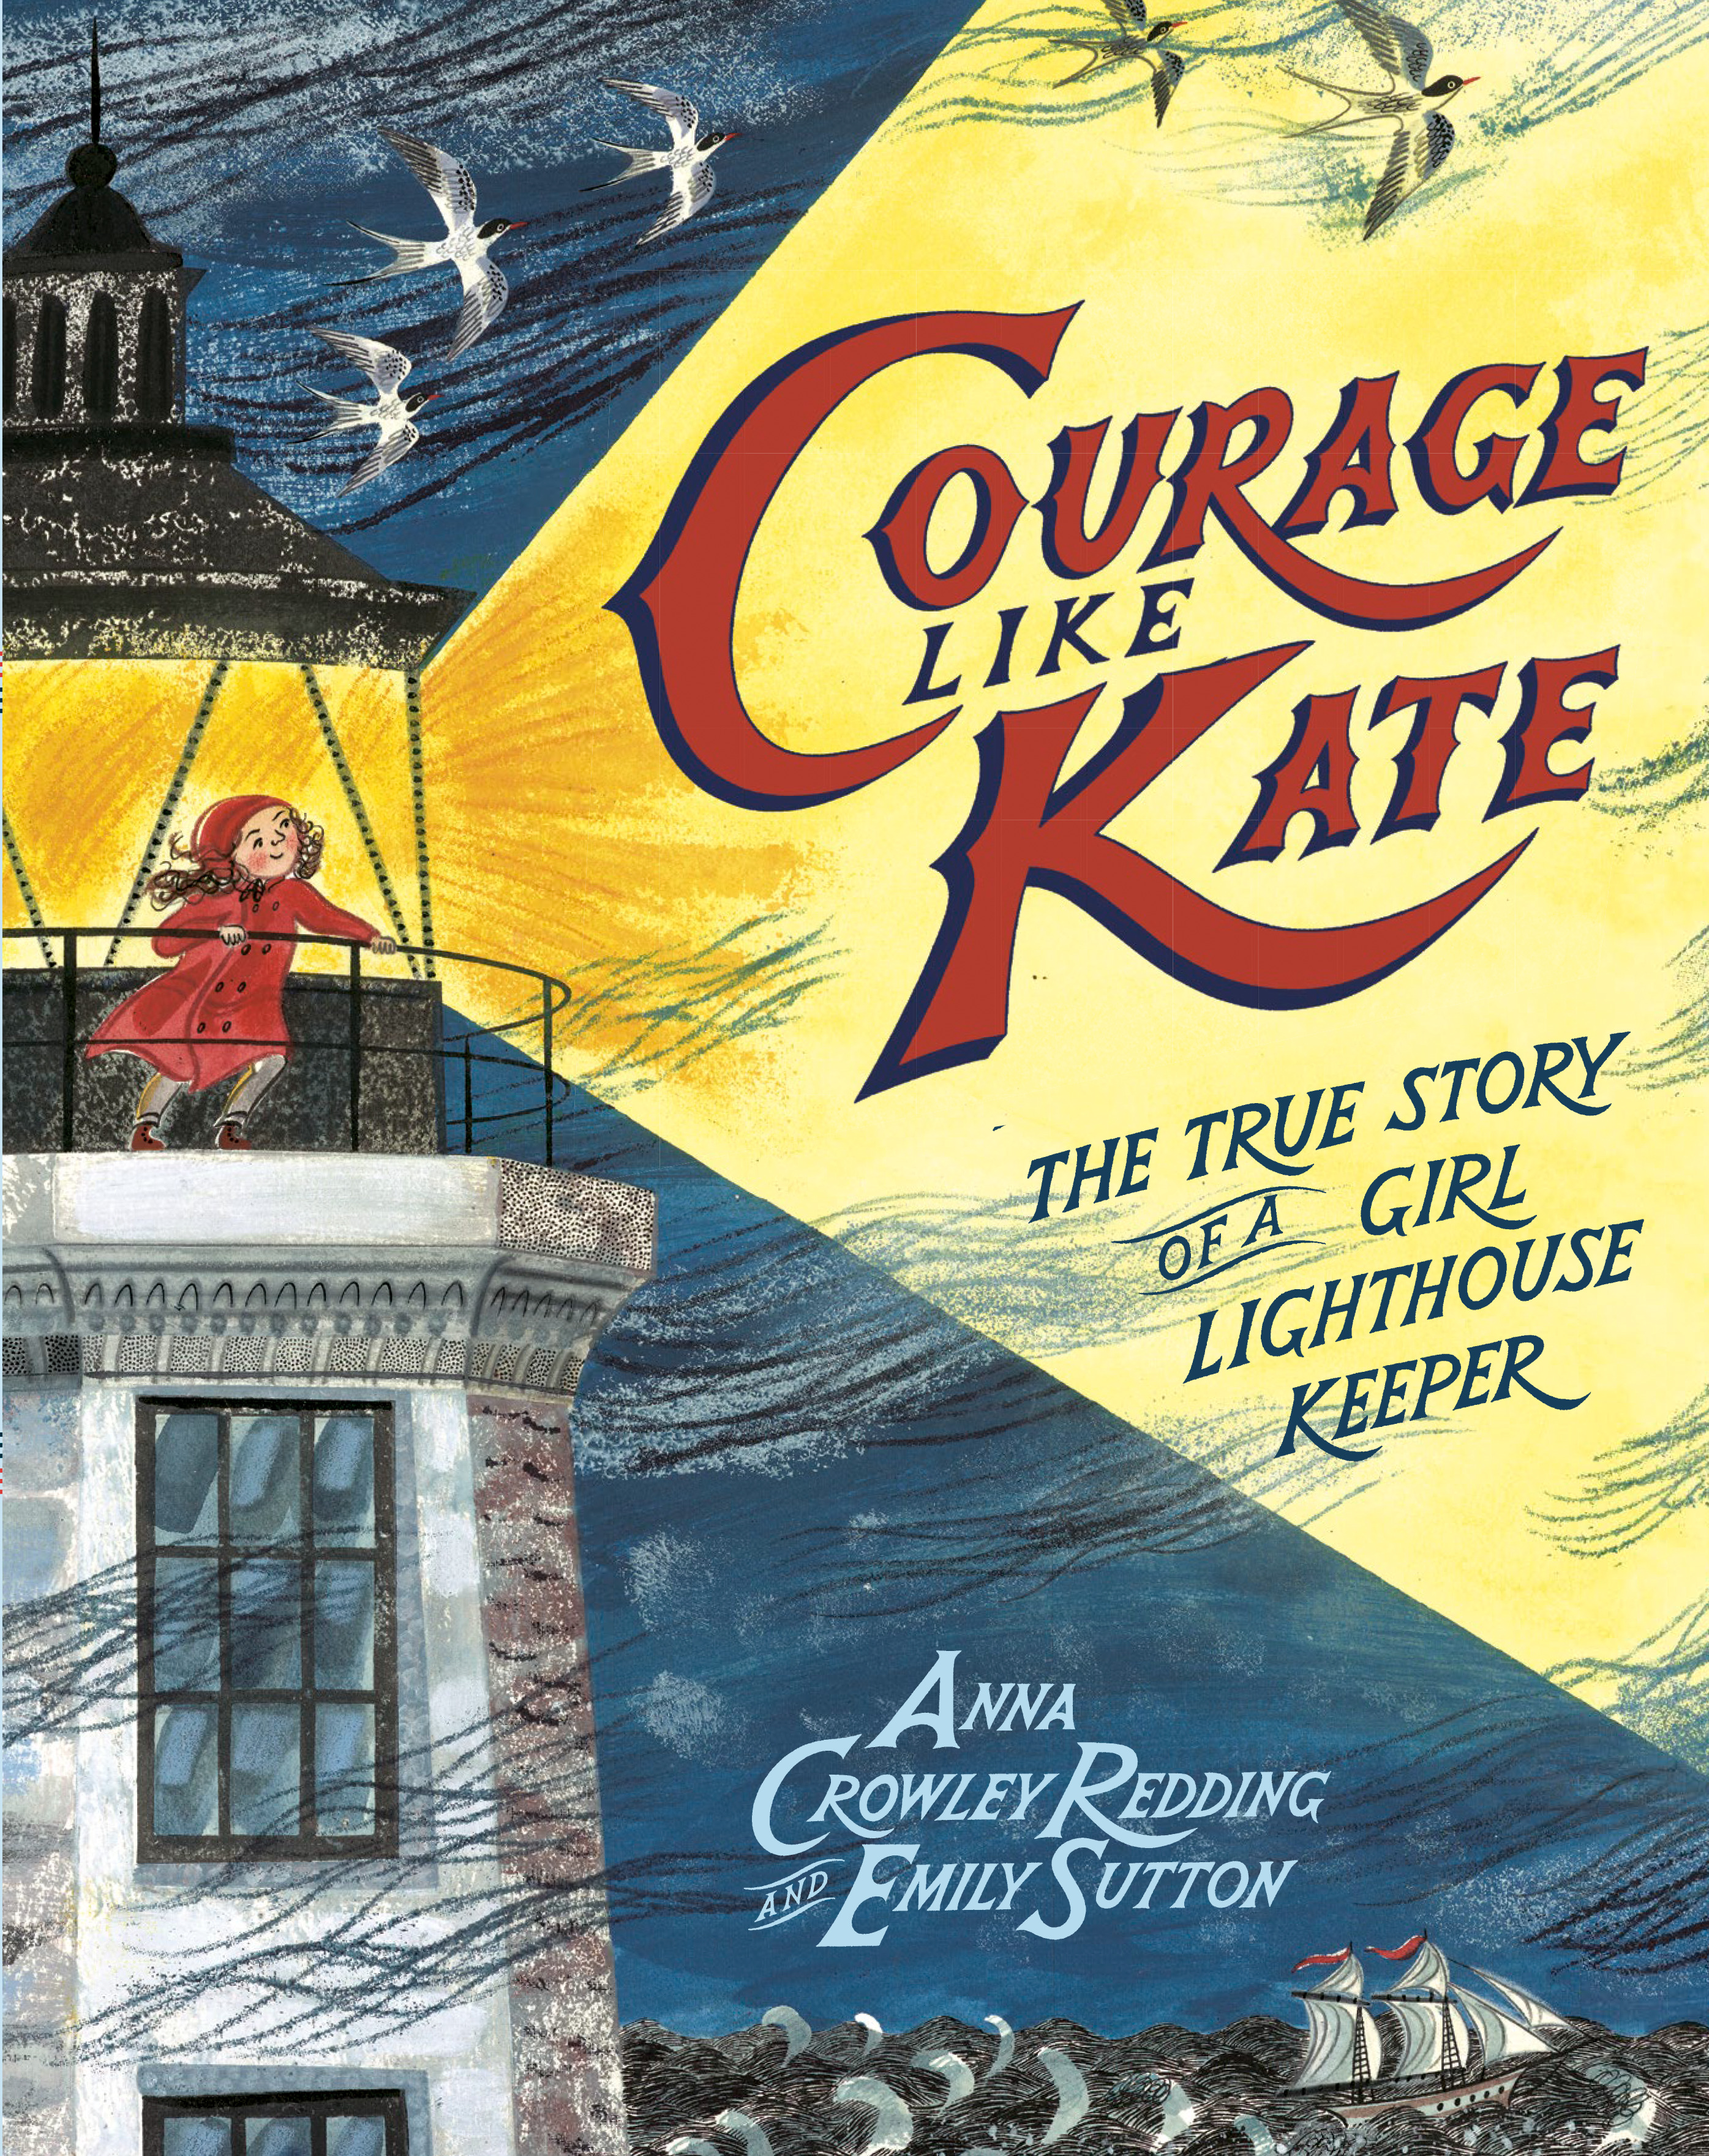 Courage Like Kate : The True Story of a Girl Lighthouse Keeper | Redding, Anna Crowley